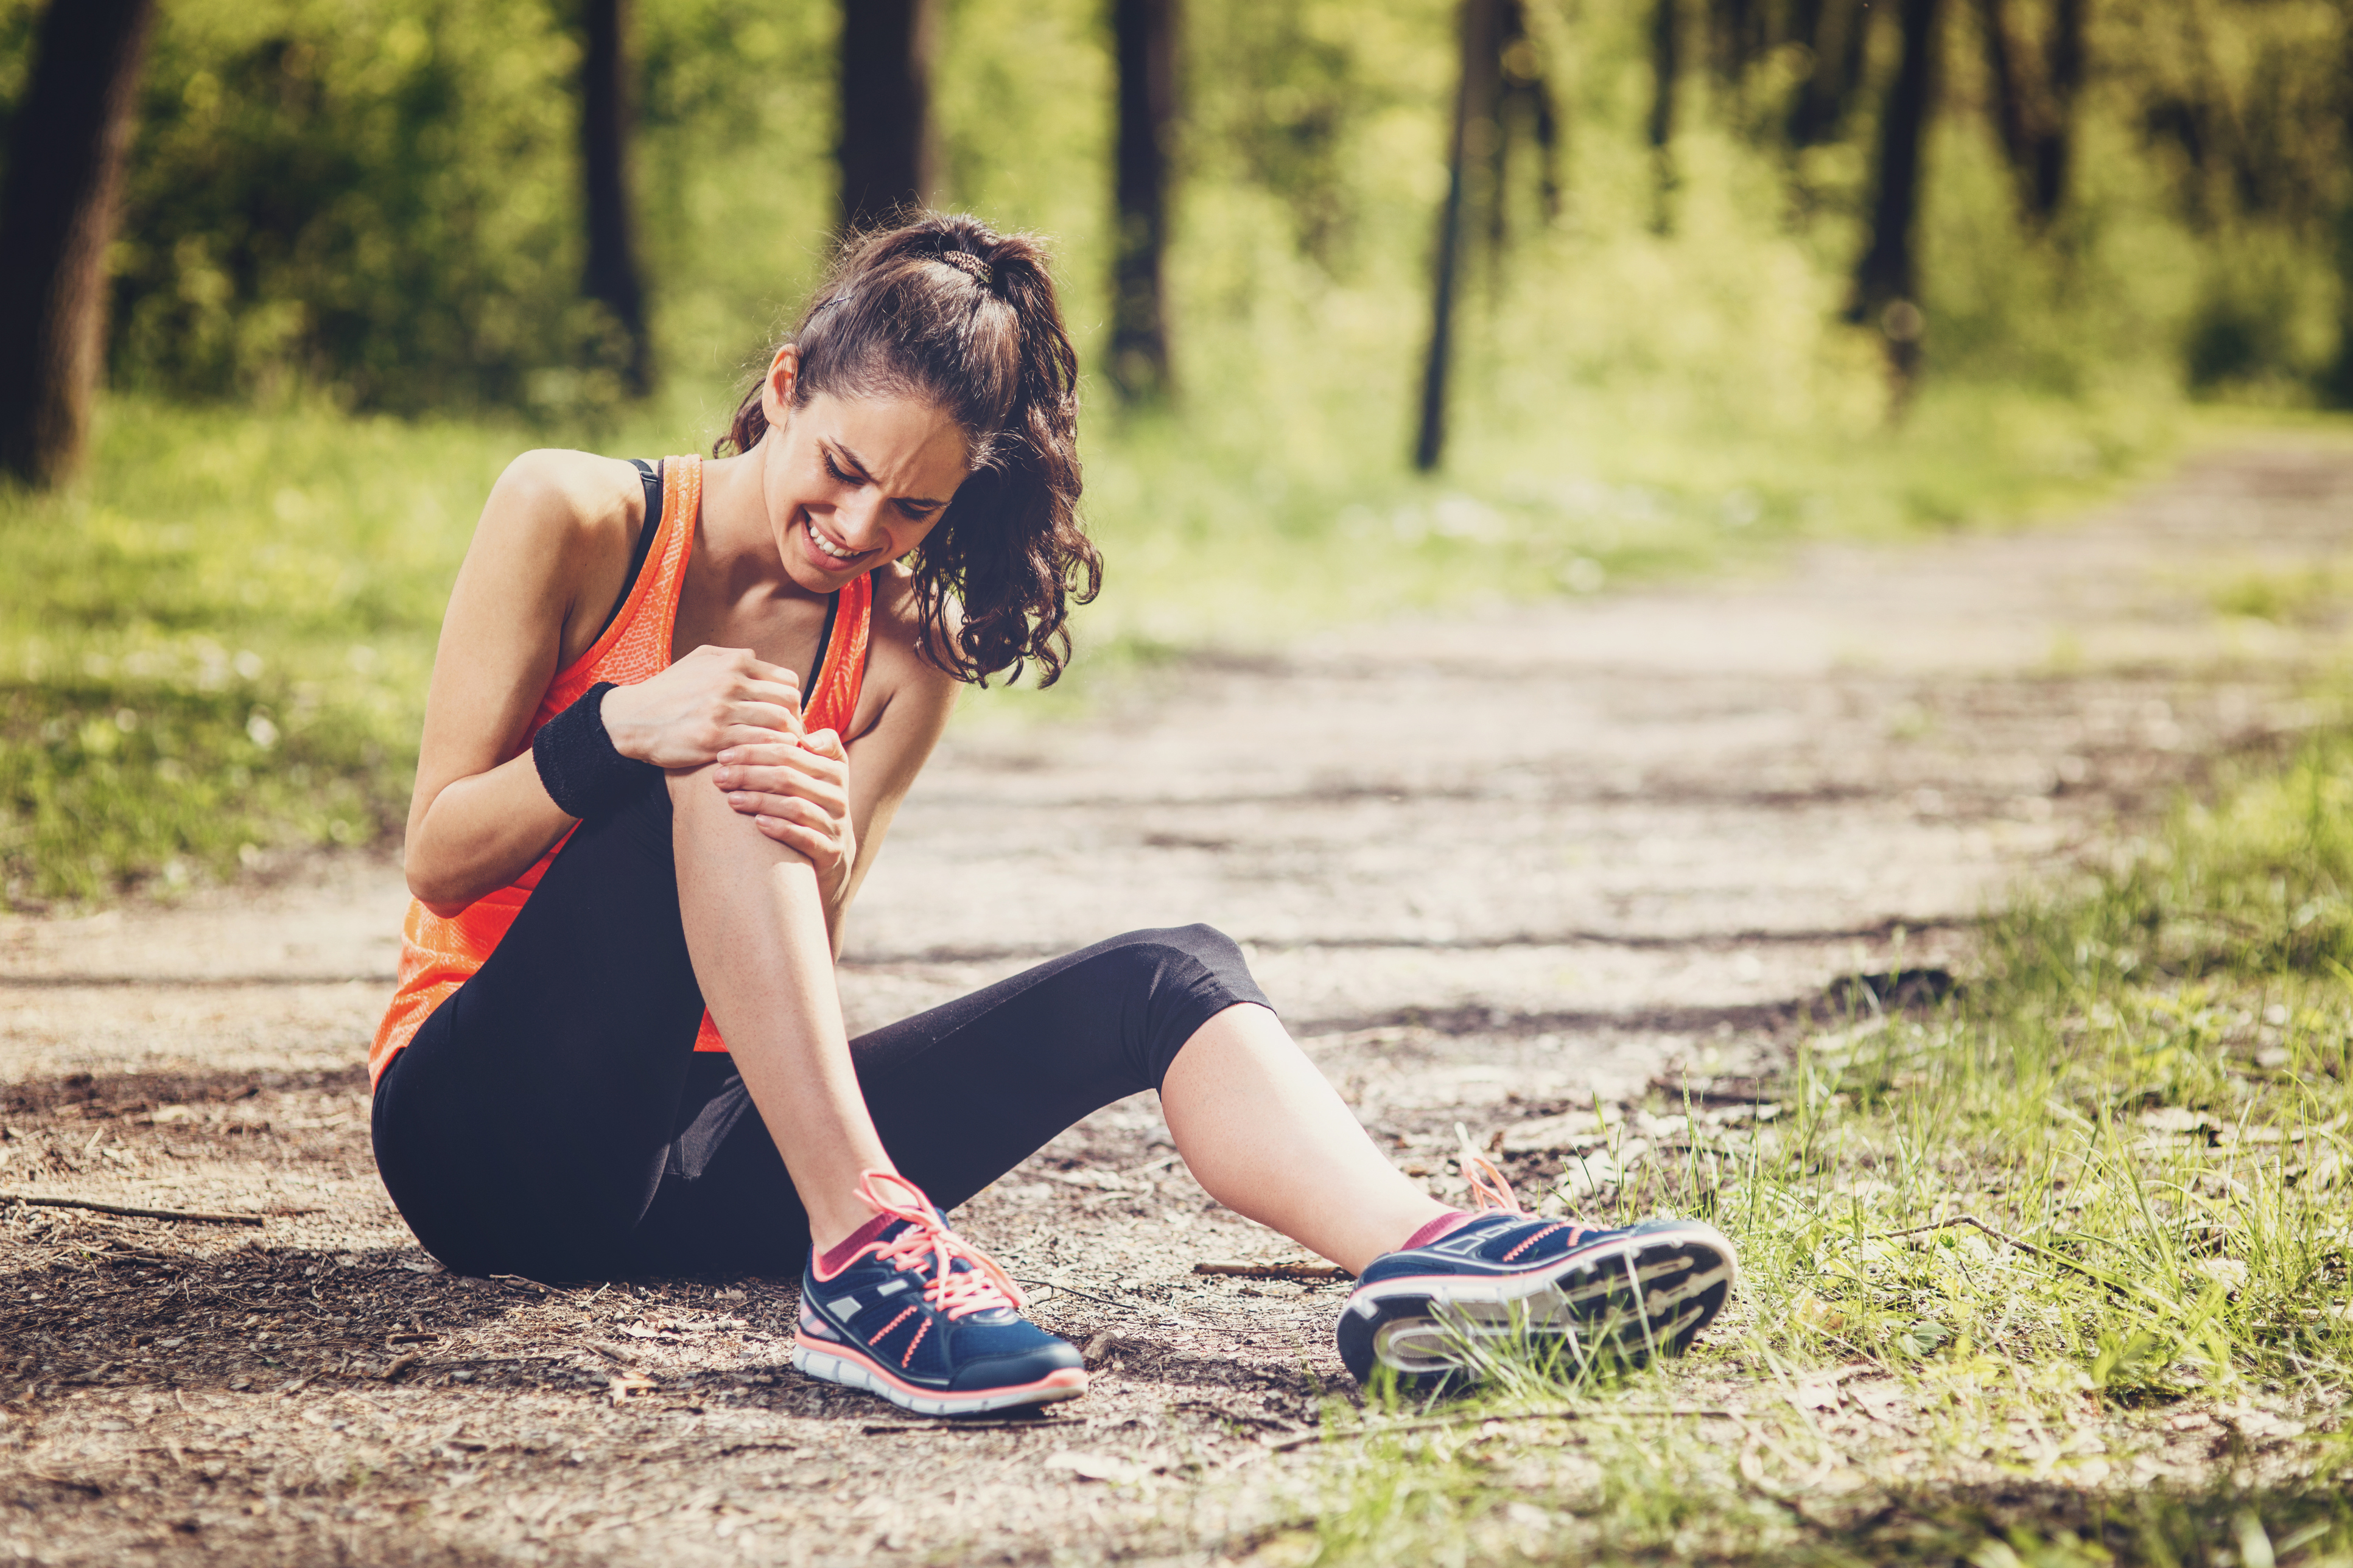 How to avoid normal running injuries